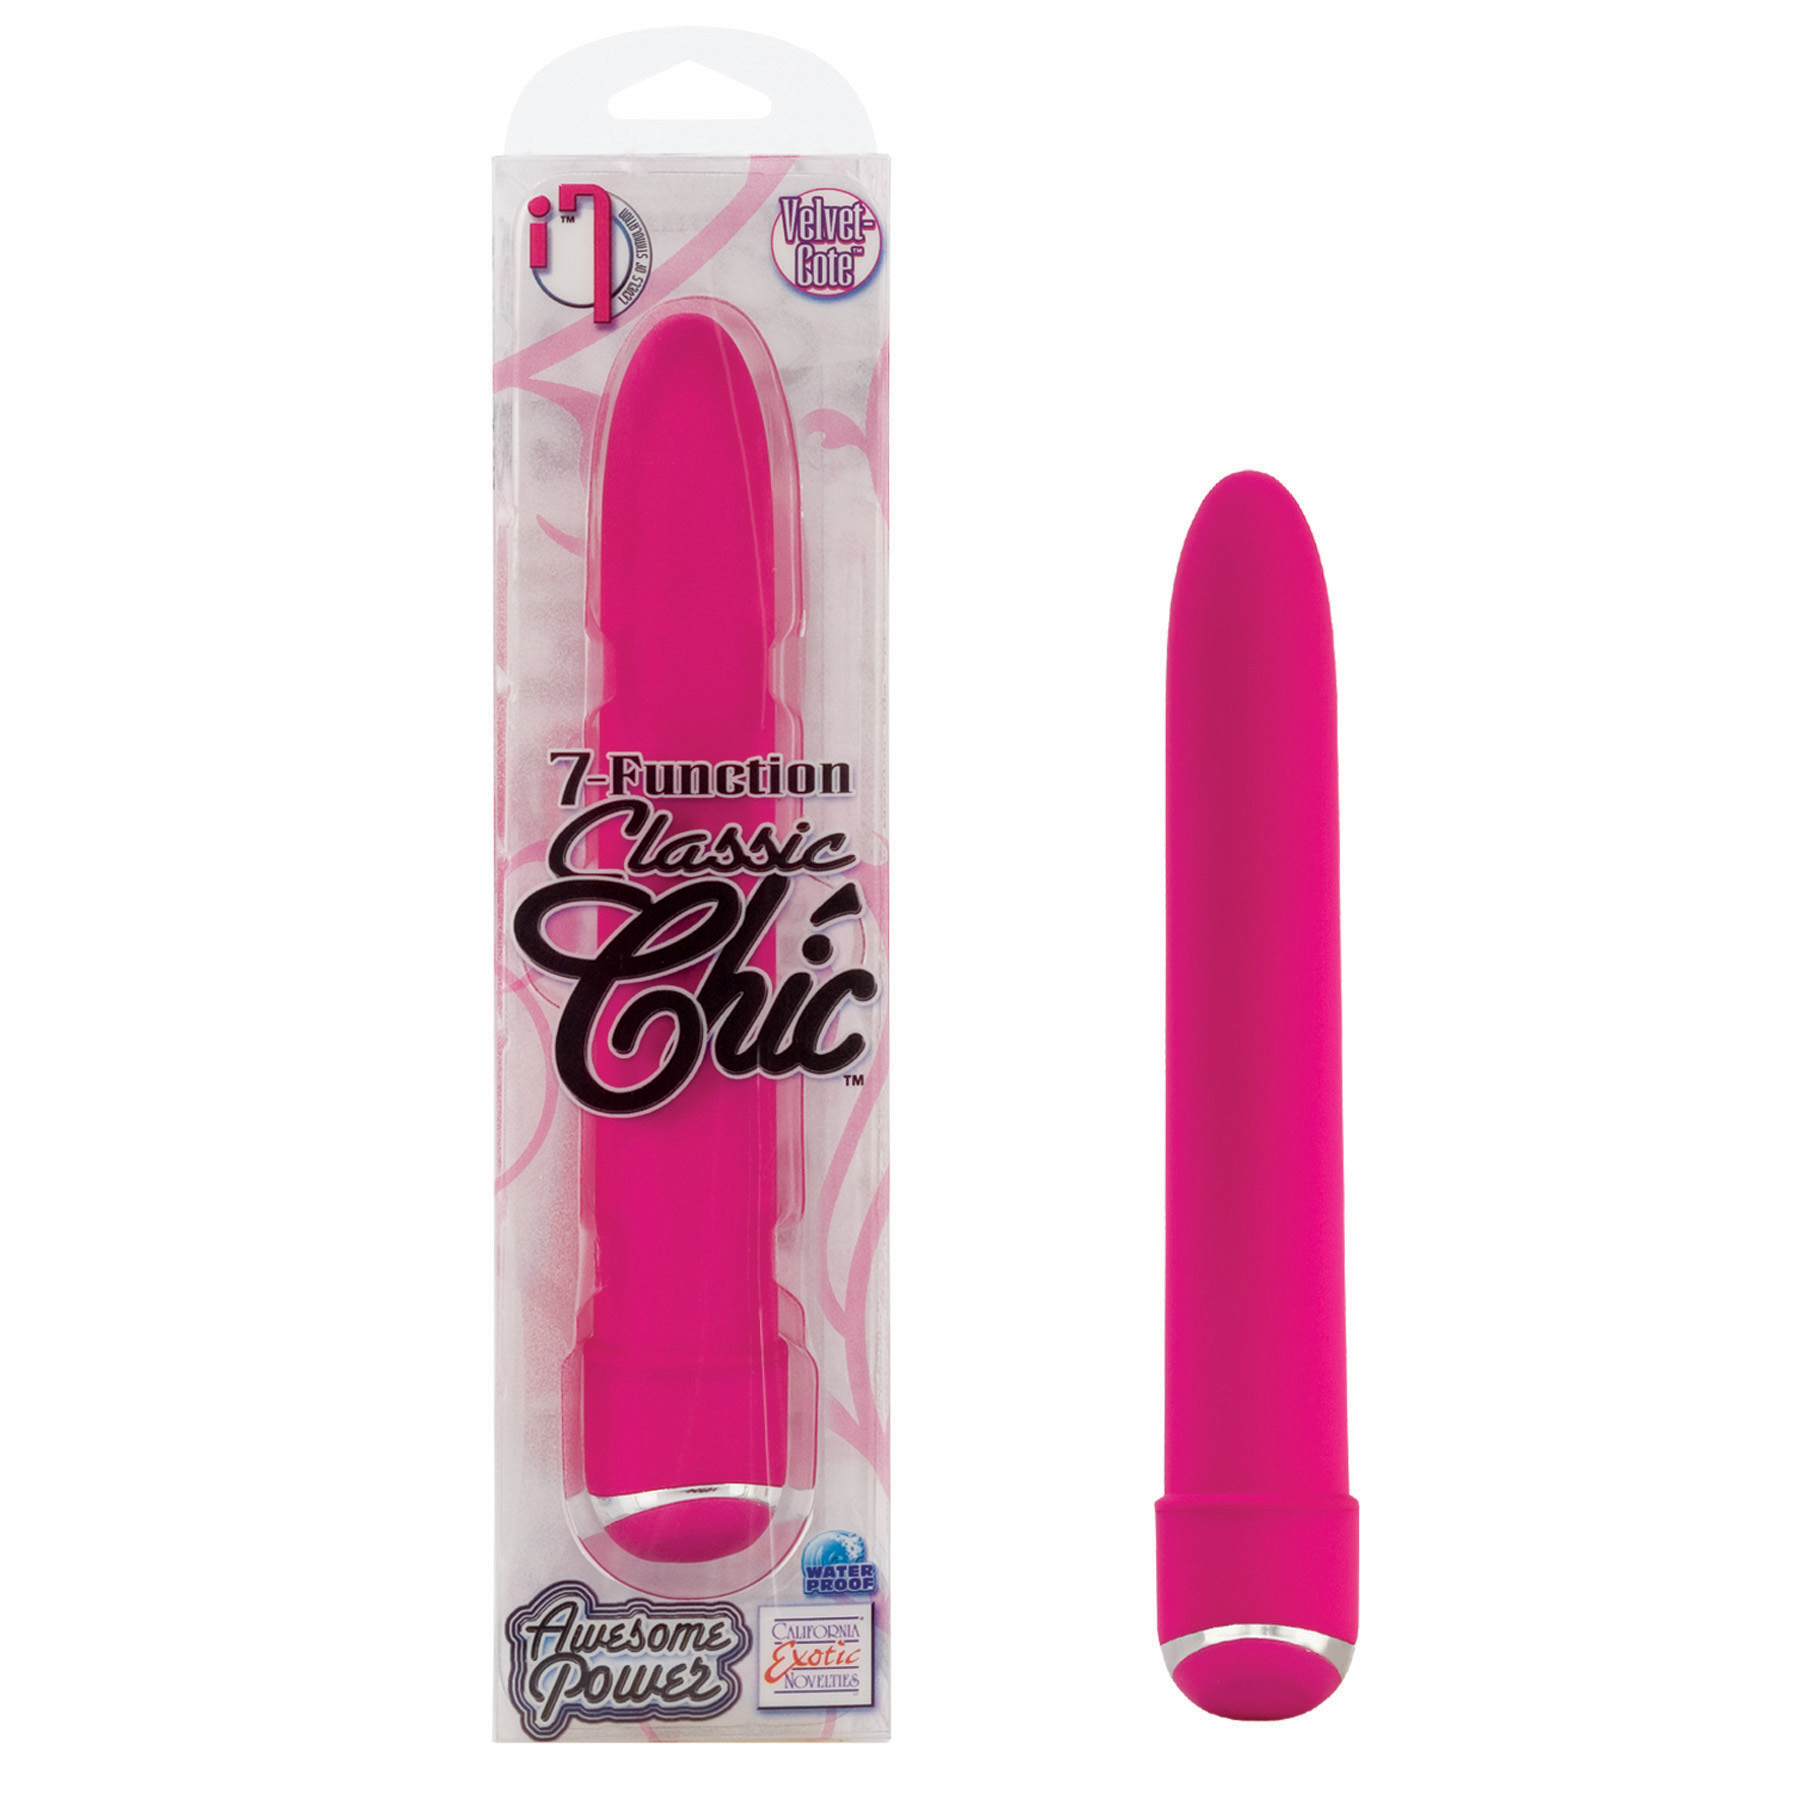 7 Function Classic Chic 6" Pink - SE049930